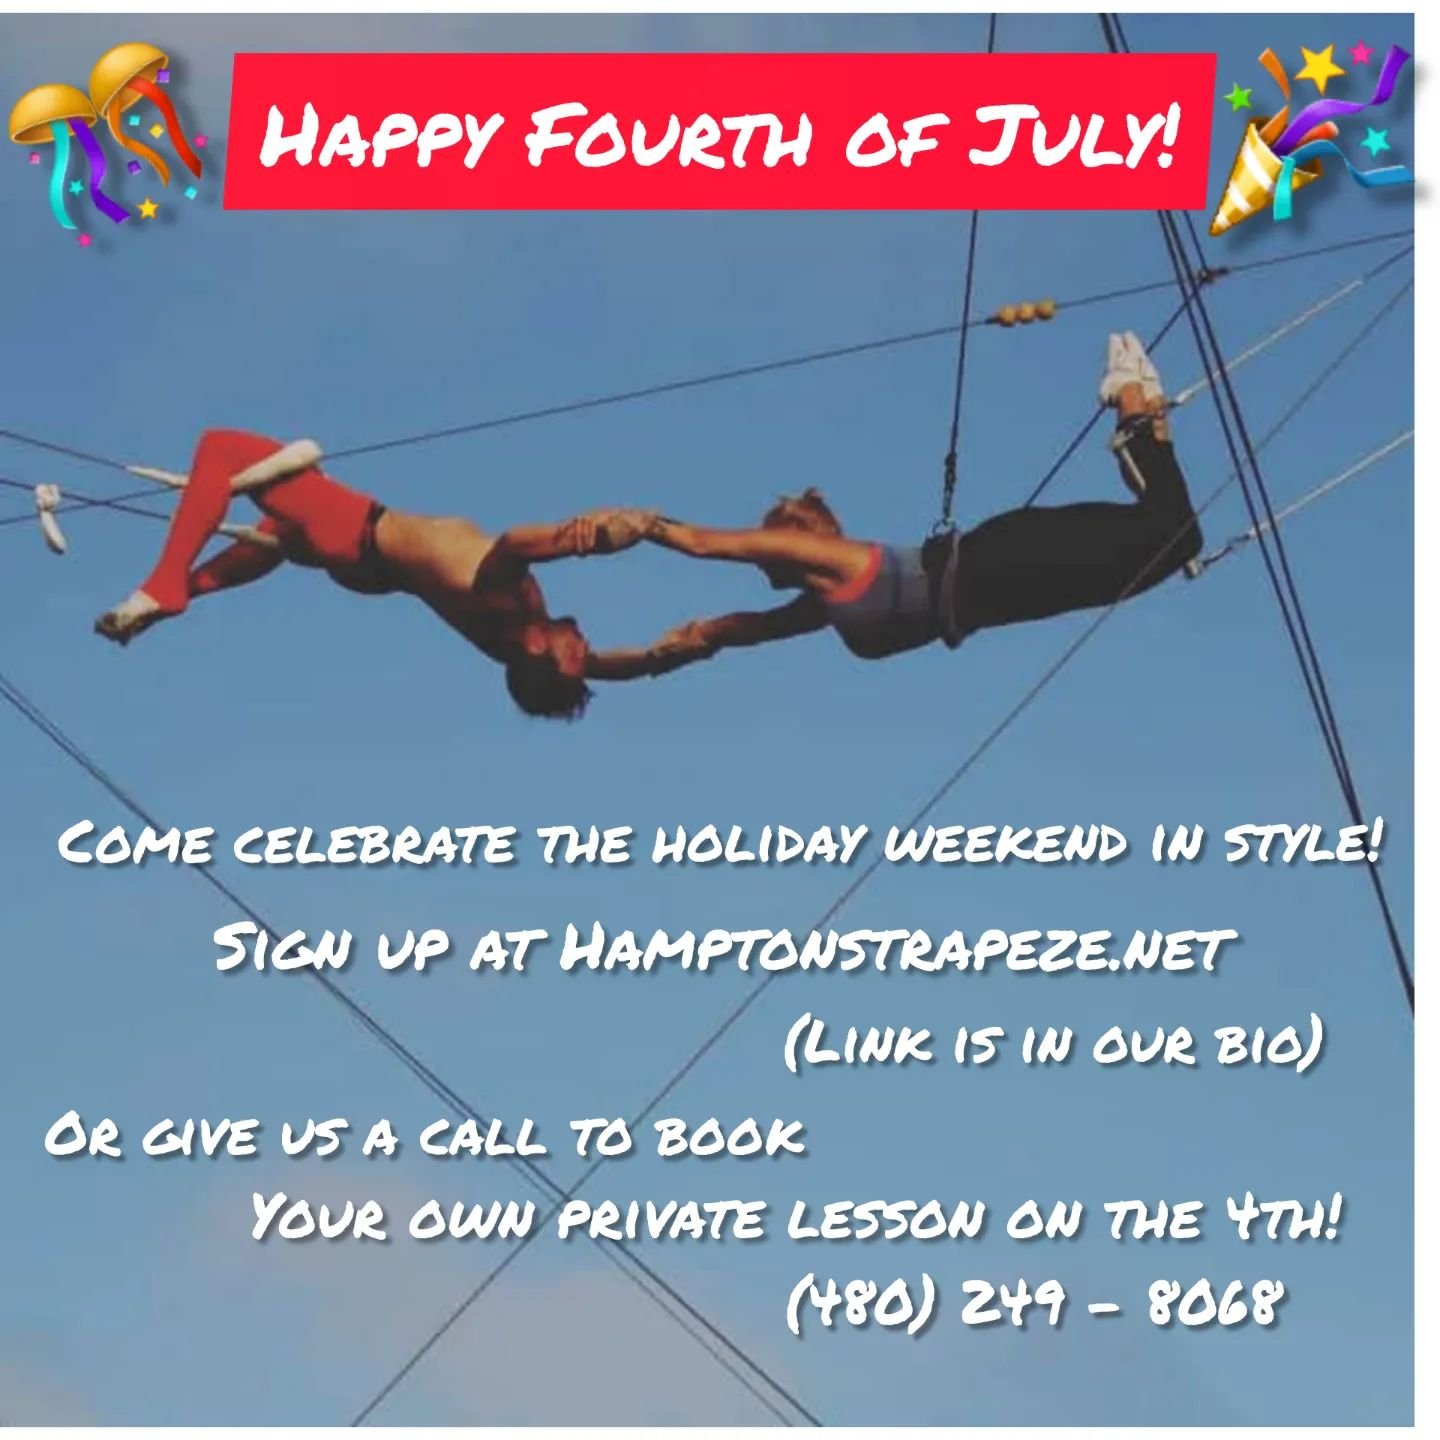 Fireworks aren't going to be the only thing in the sky this weekend!

Put on your star spangled tights and come fly with us! Open classes all weekend.

OR give us a call to book your very own private party on the 4th of July itself! (catering availab